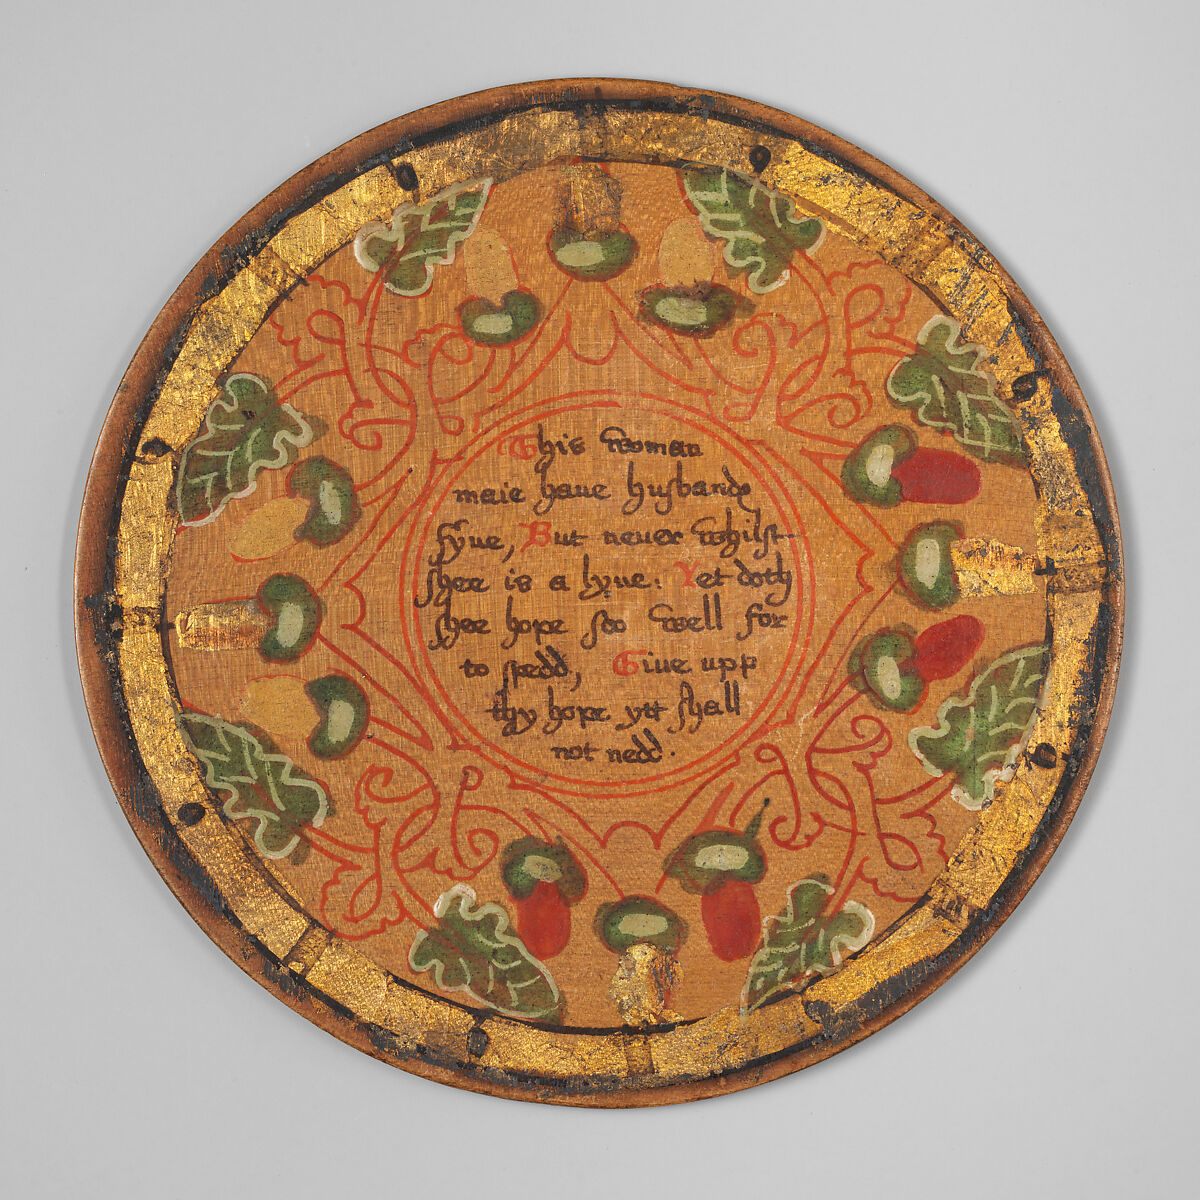 Trencher (one of a set), Oak and sycamore woods, painted, silvered and yellow varnished; inscription: ink (animal or vegetable), British